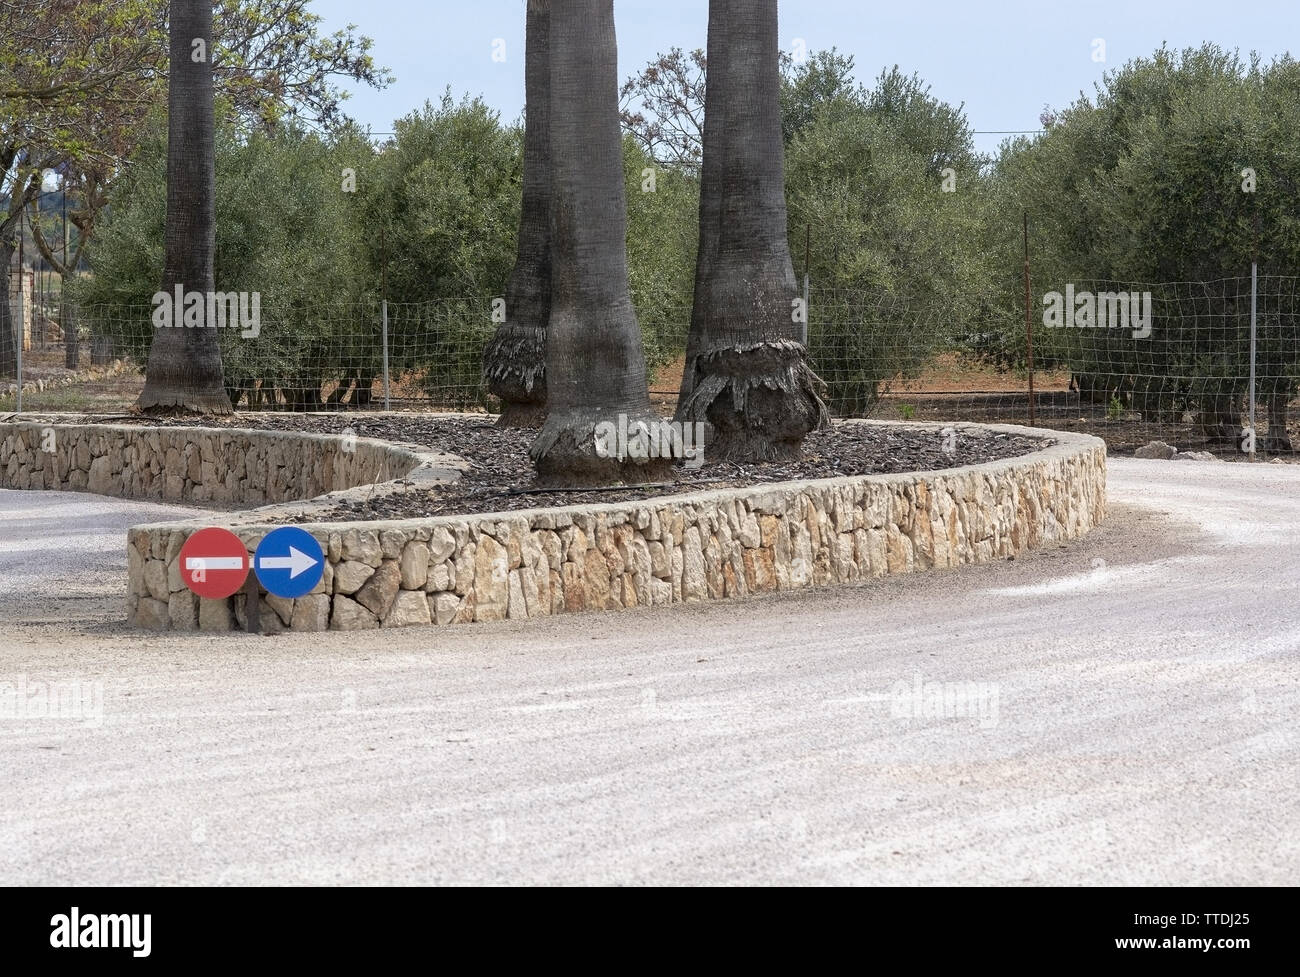 Circular road signs for direction and stone wall shape with trees in Mallorca, Spain. Stock Photo